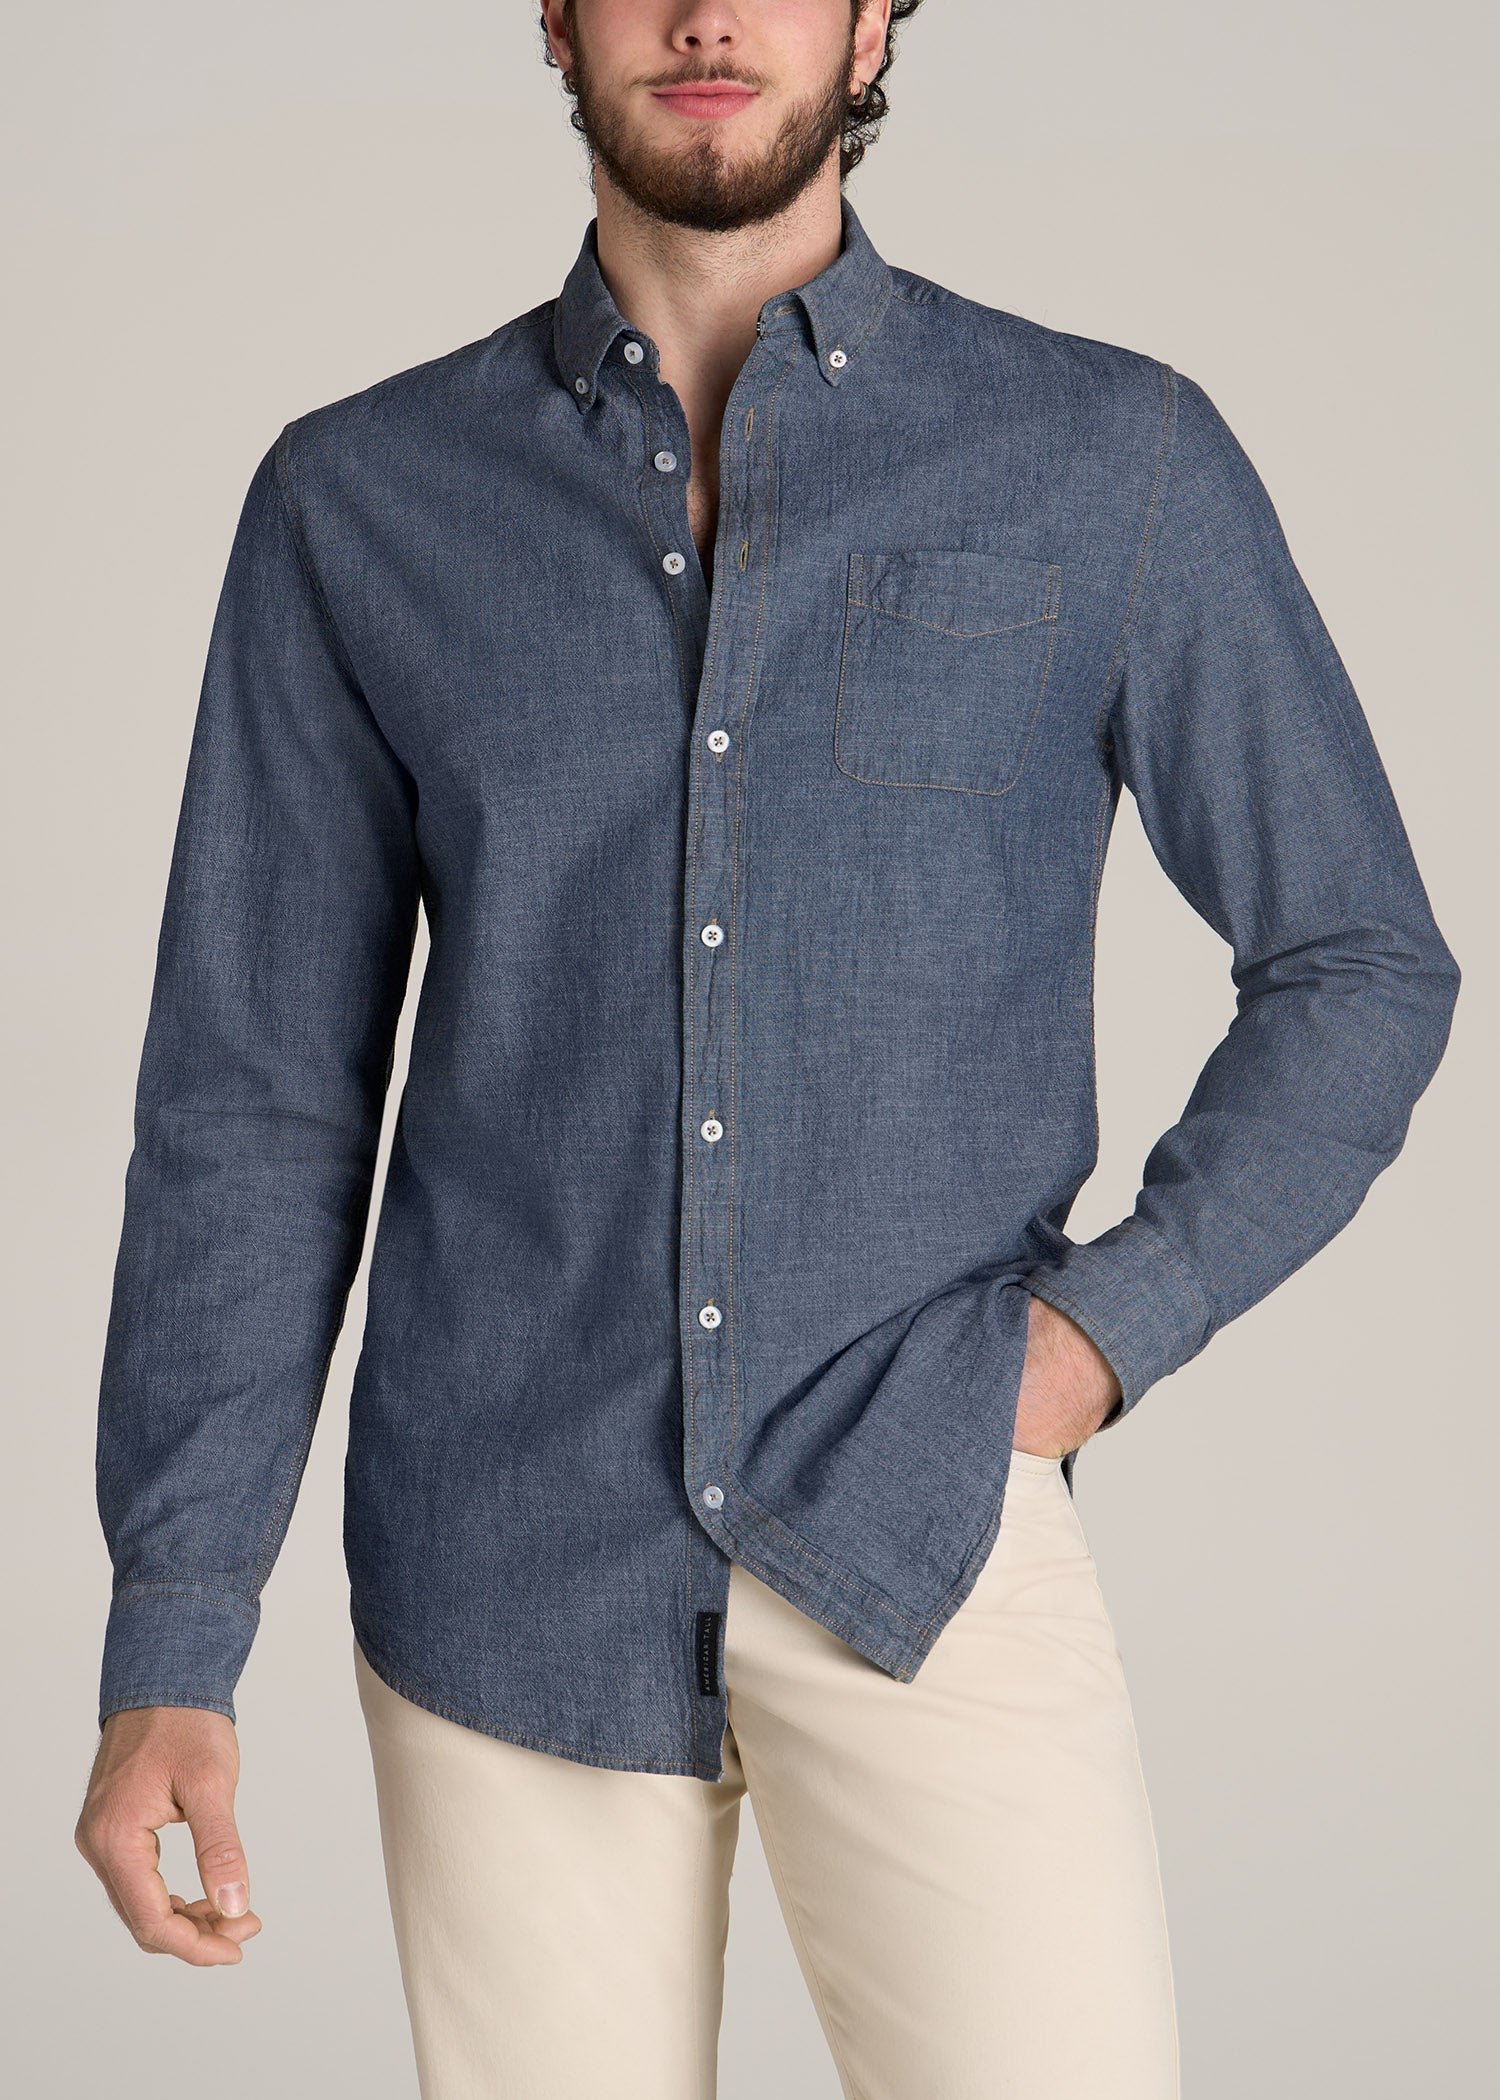 Chambray Shirt in Untucked Fit